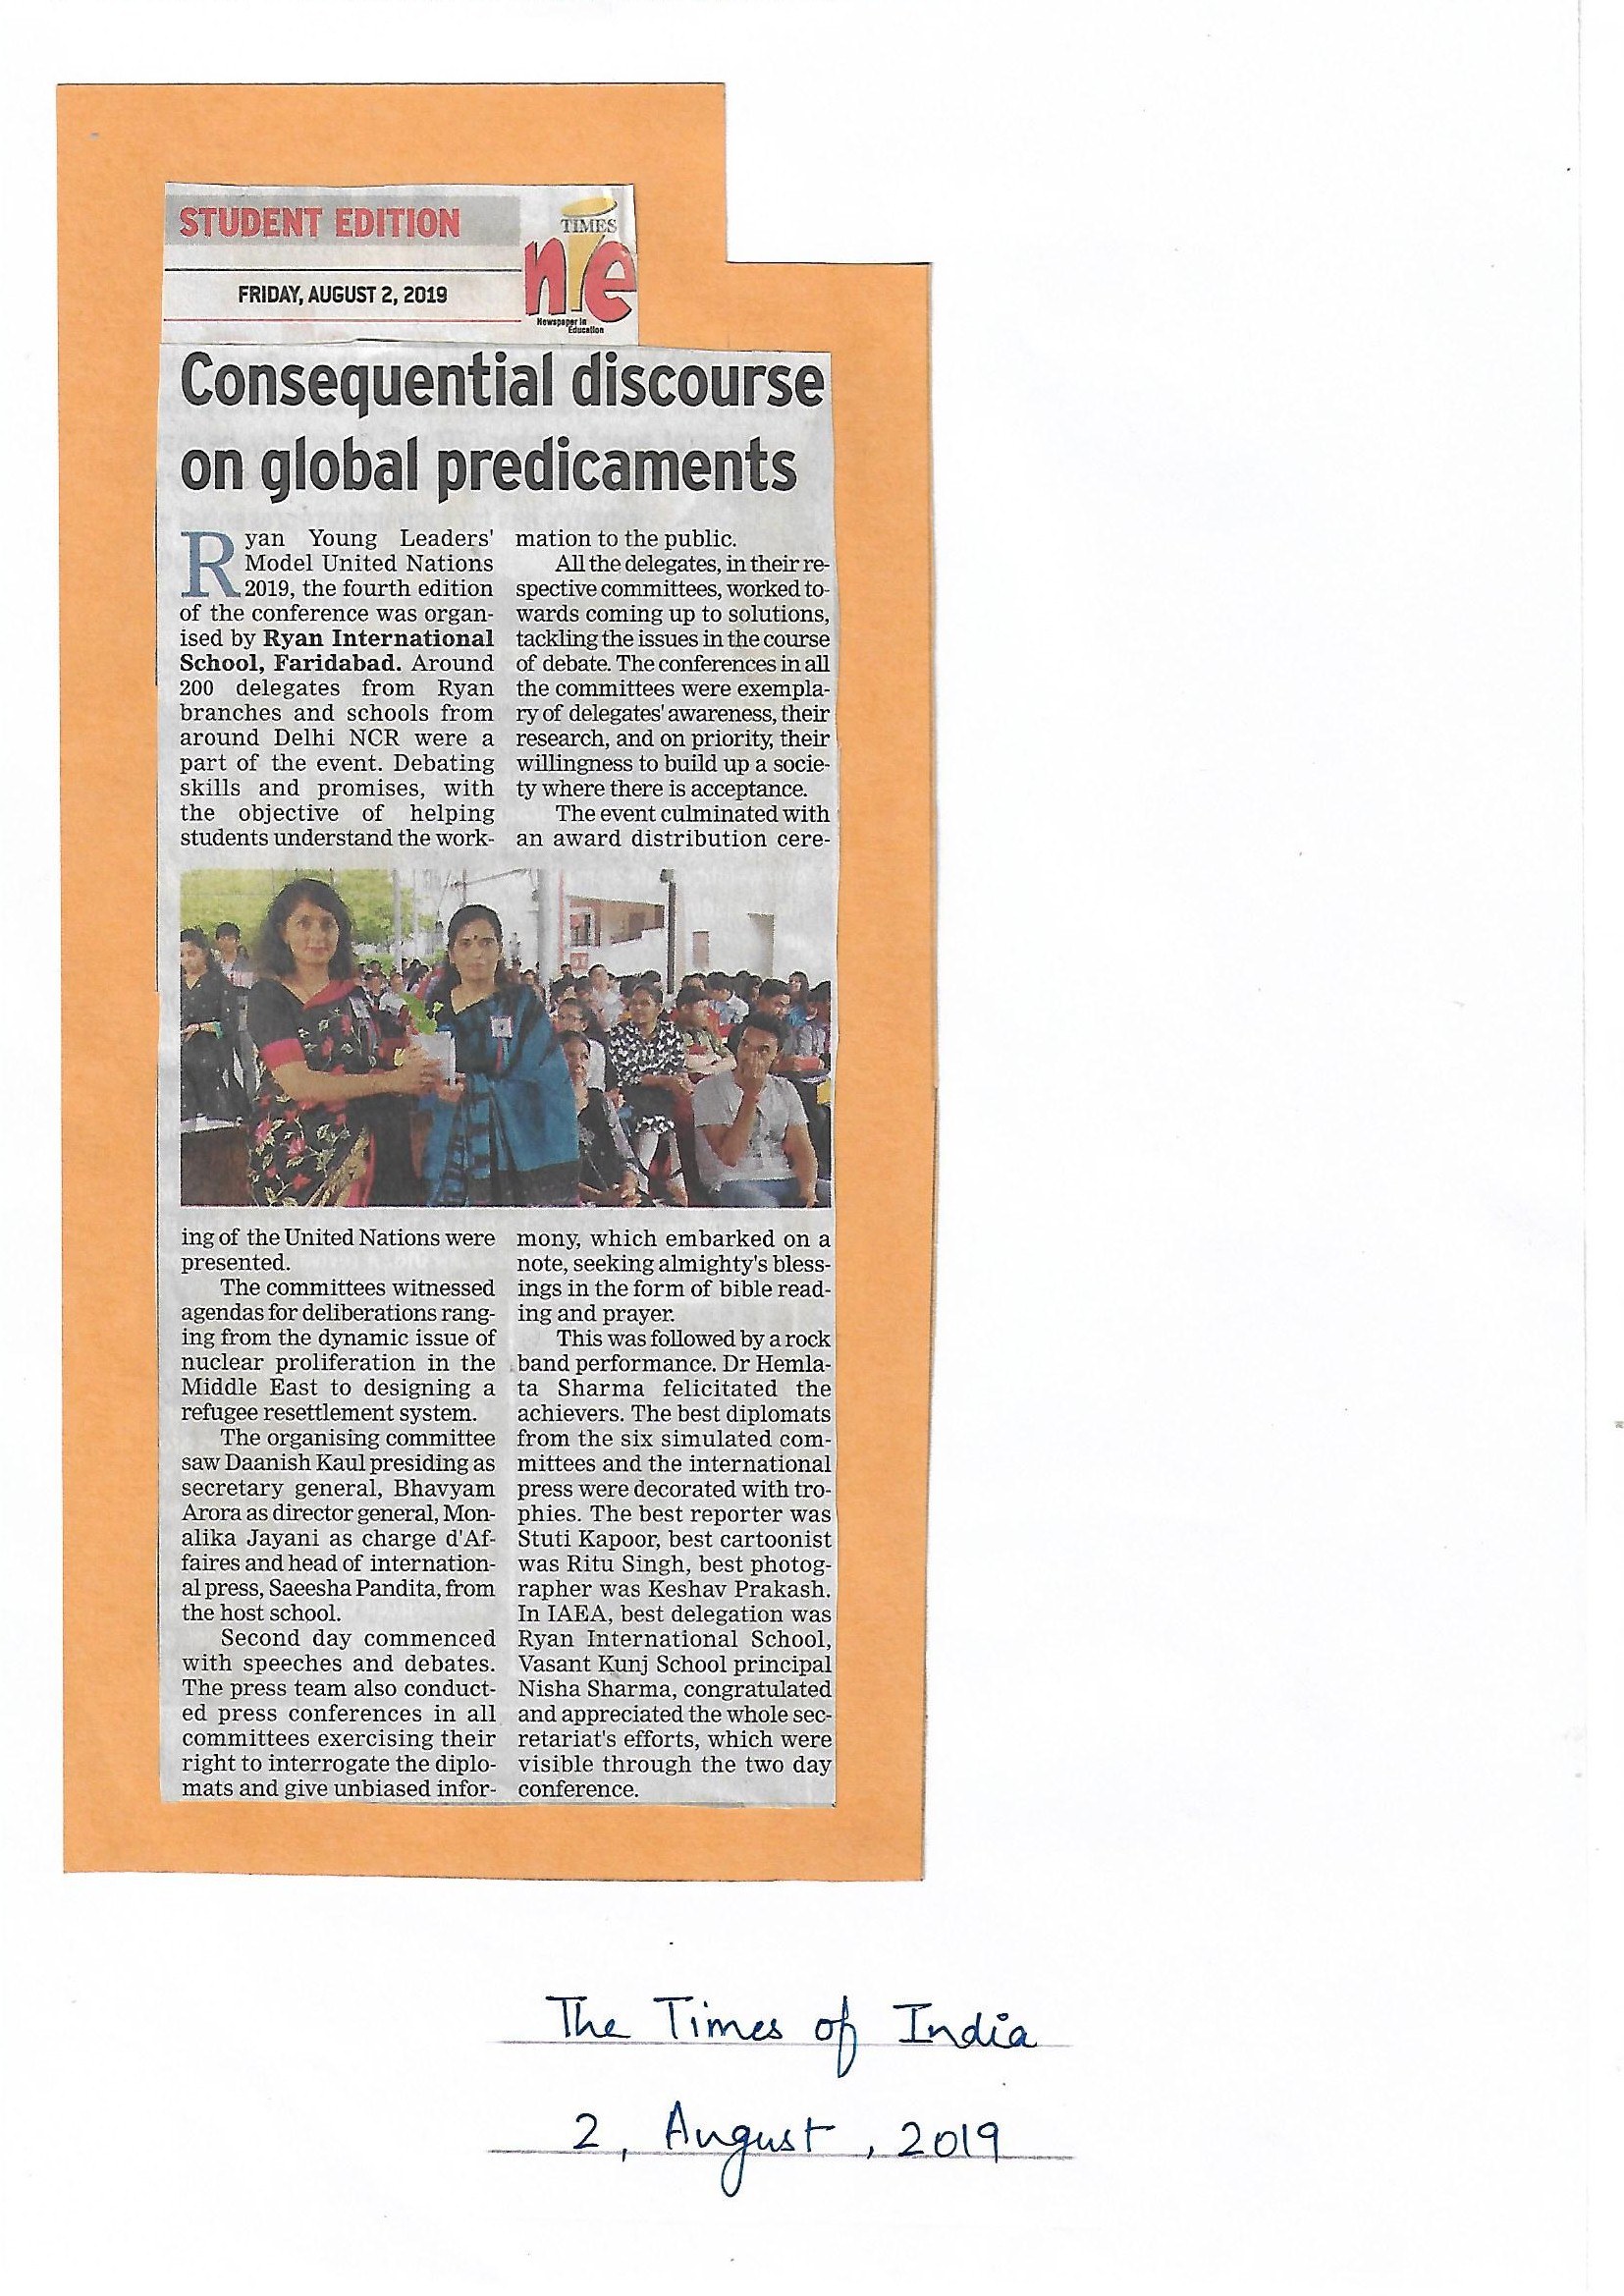 Consequential discourse on global predicaments - Ryan International School, Faridabad